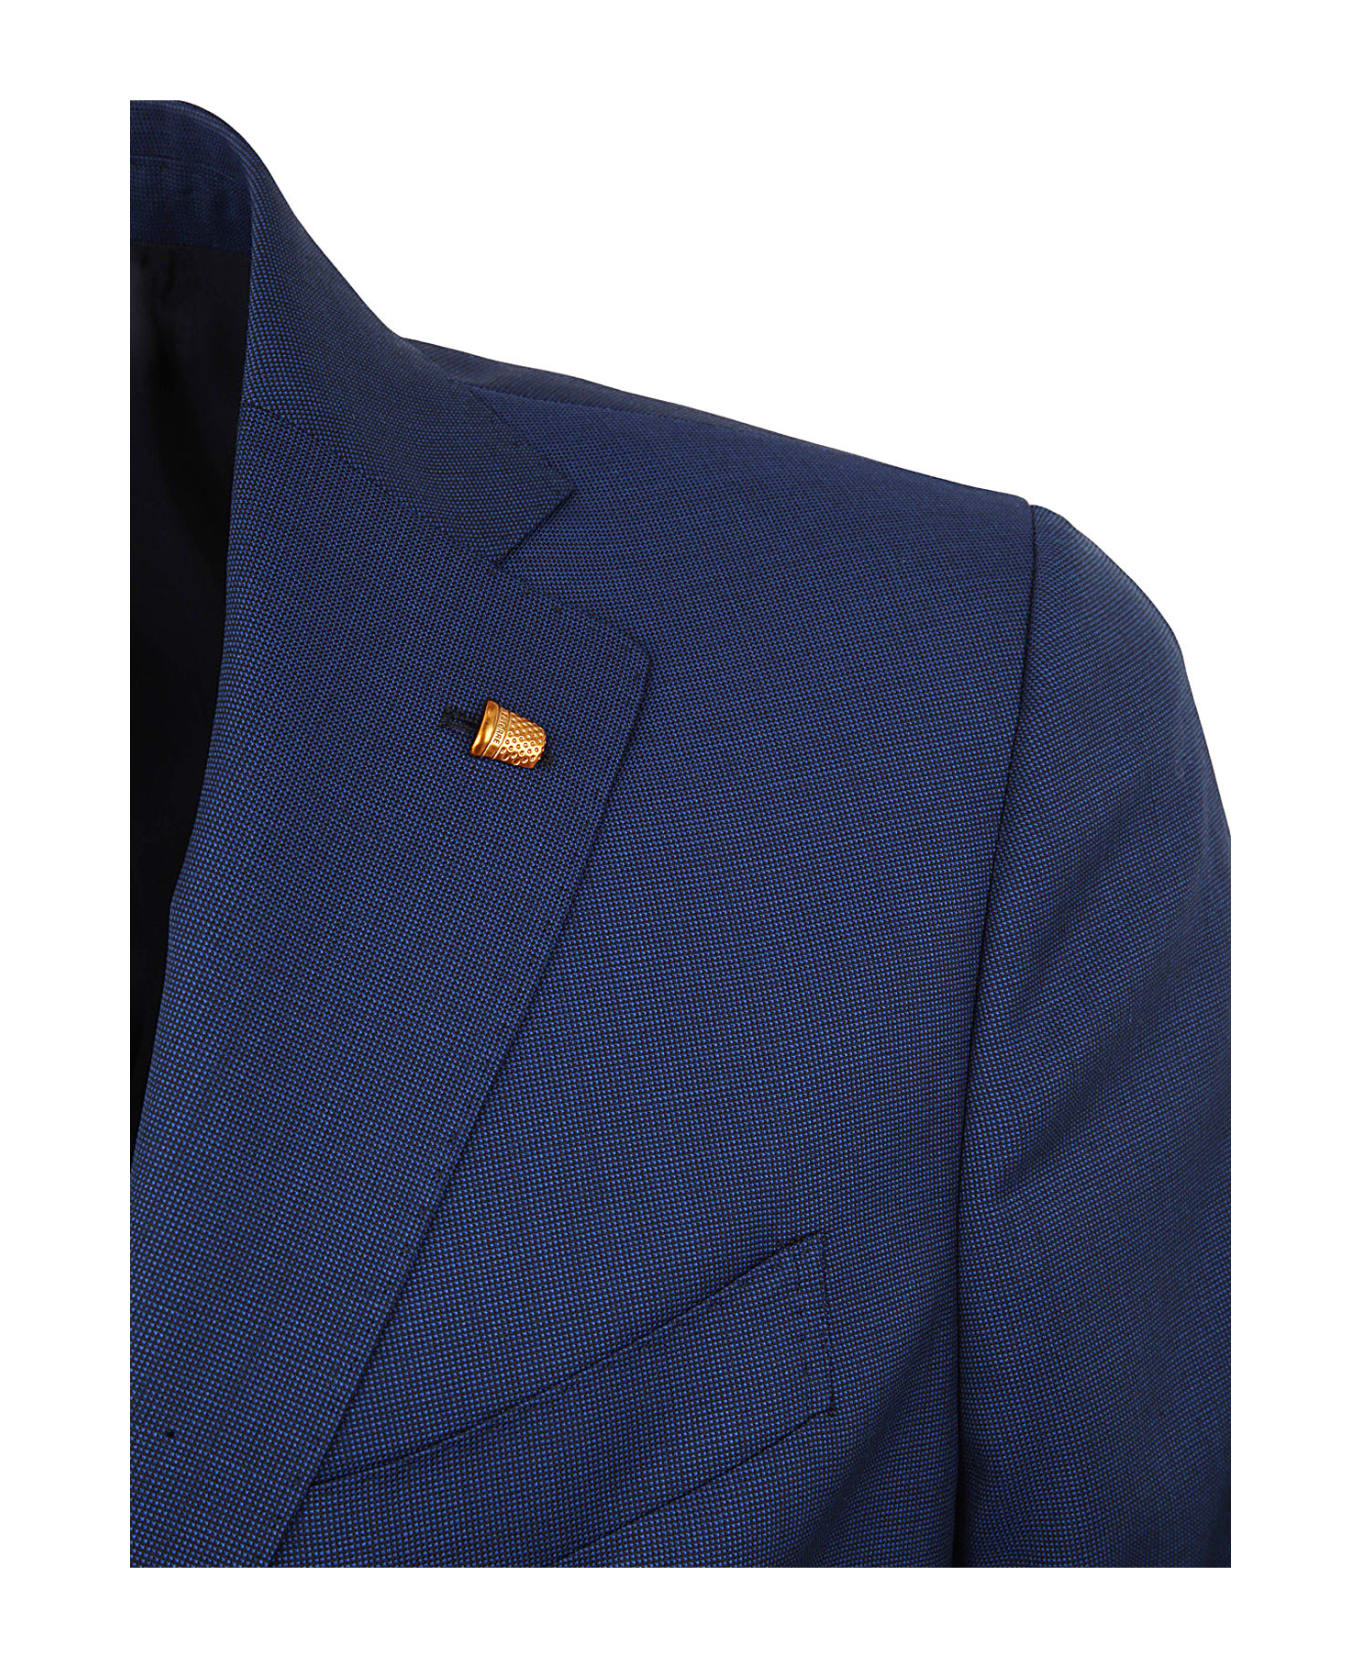 Sartoria Latorre Wool Suit With Two Buttons - Blue